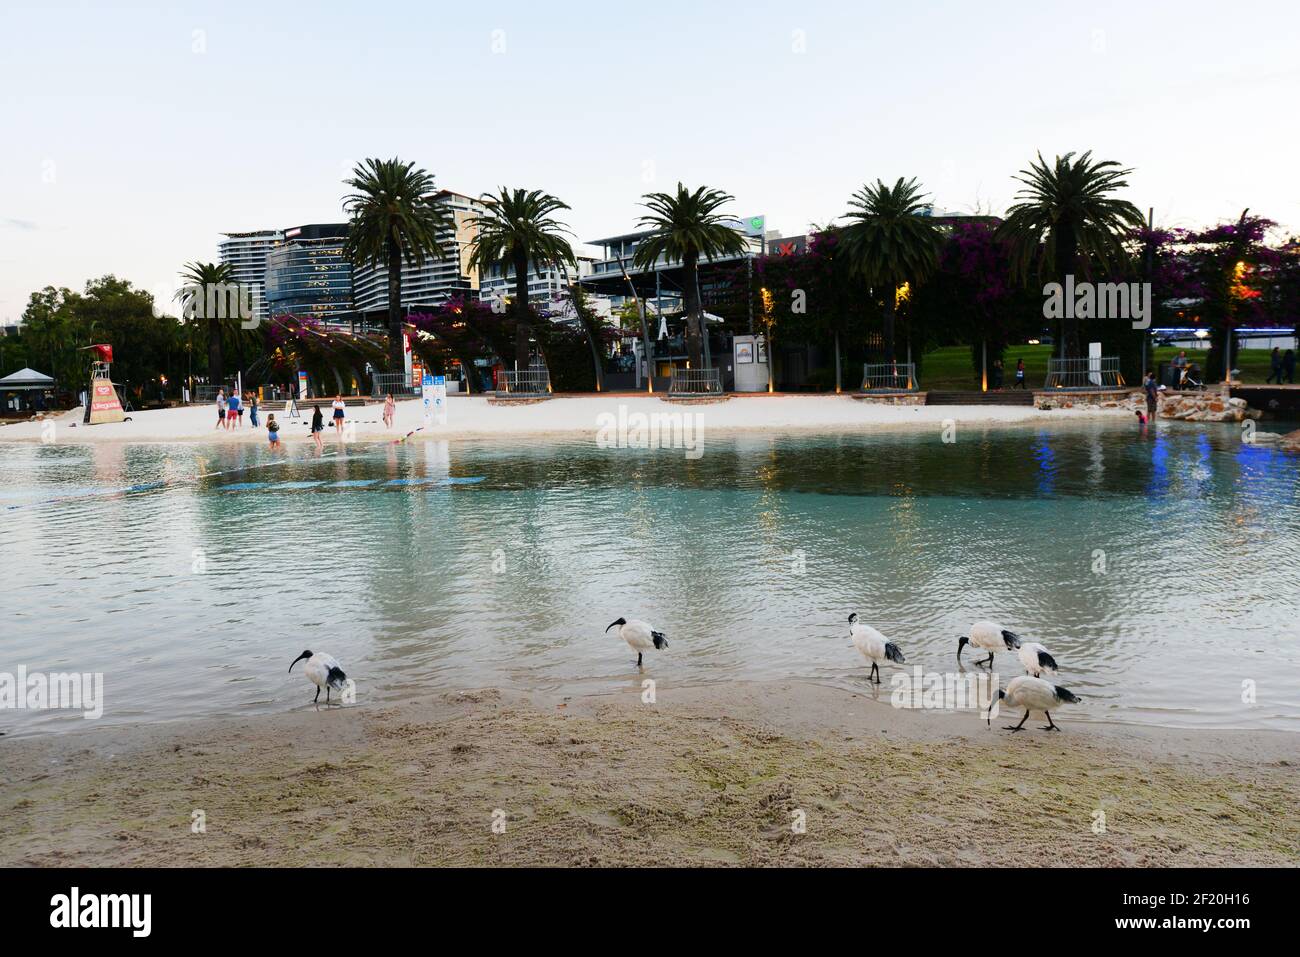 The Boat pool at Stanley St Plaza, South Brisbane, Queensland, Australia. Stock Photo